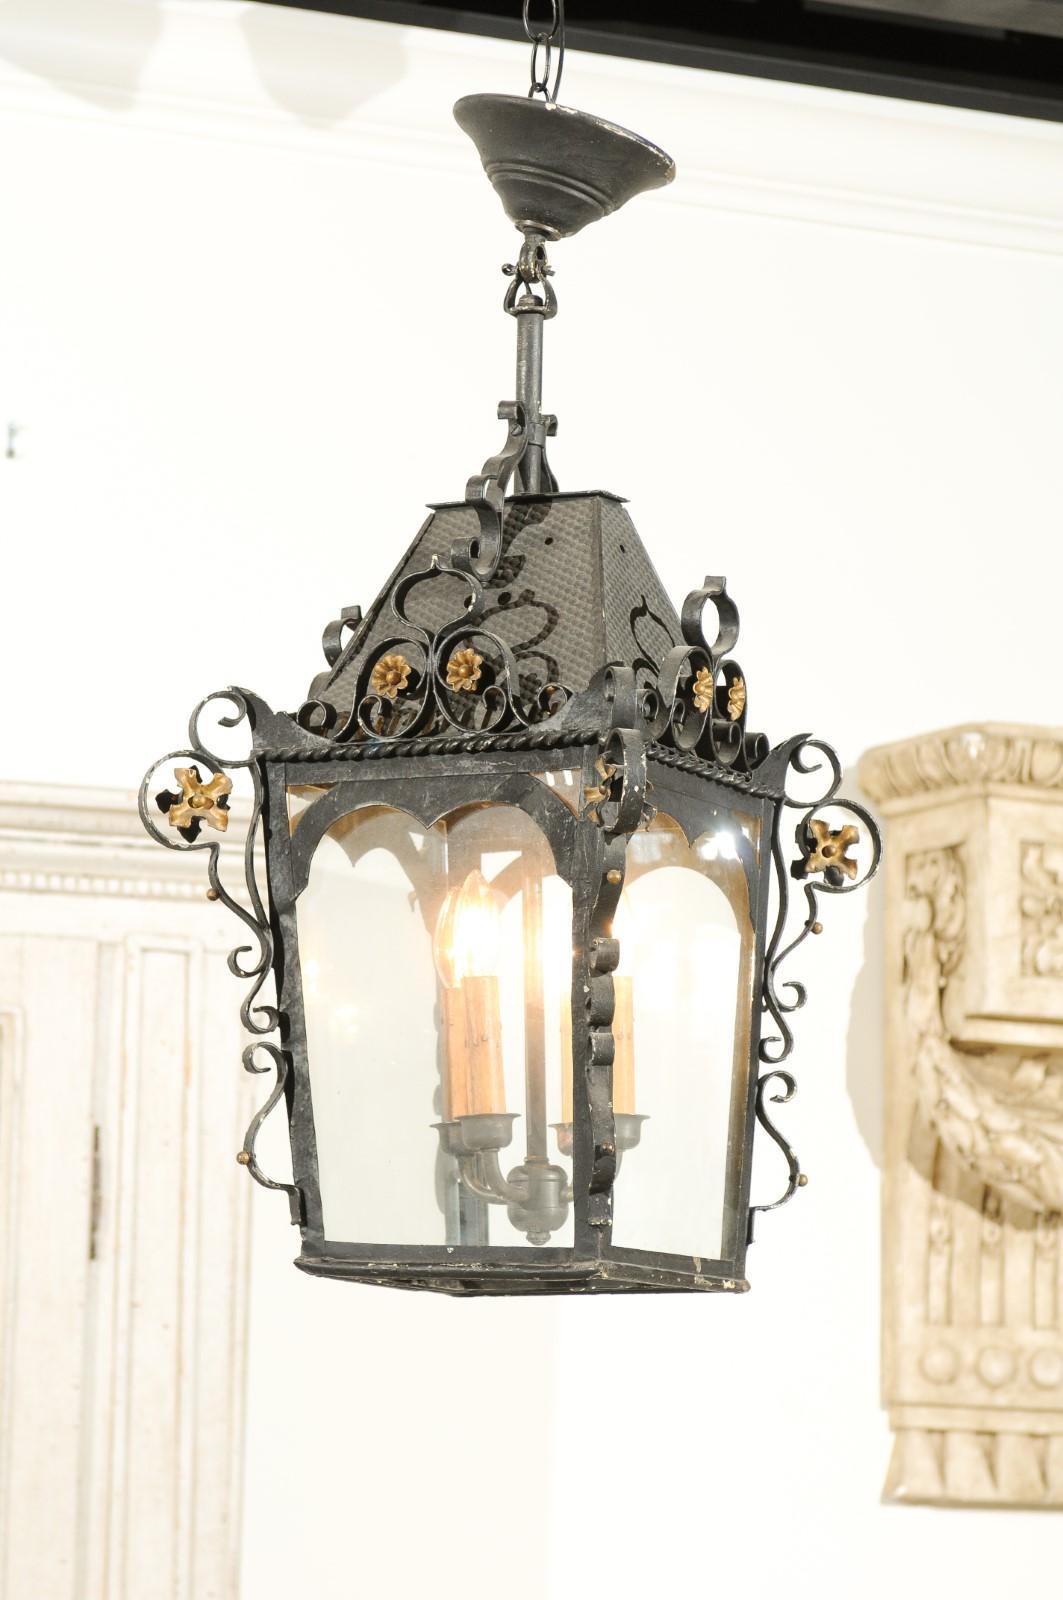 A Swedish black iron three-light lantern from the late 19th century, with gilt floral accents. Born in Sweden during the last decade of the 19th century, this charming lantern features a black iron structure adorned with delicate gilt flowers